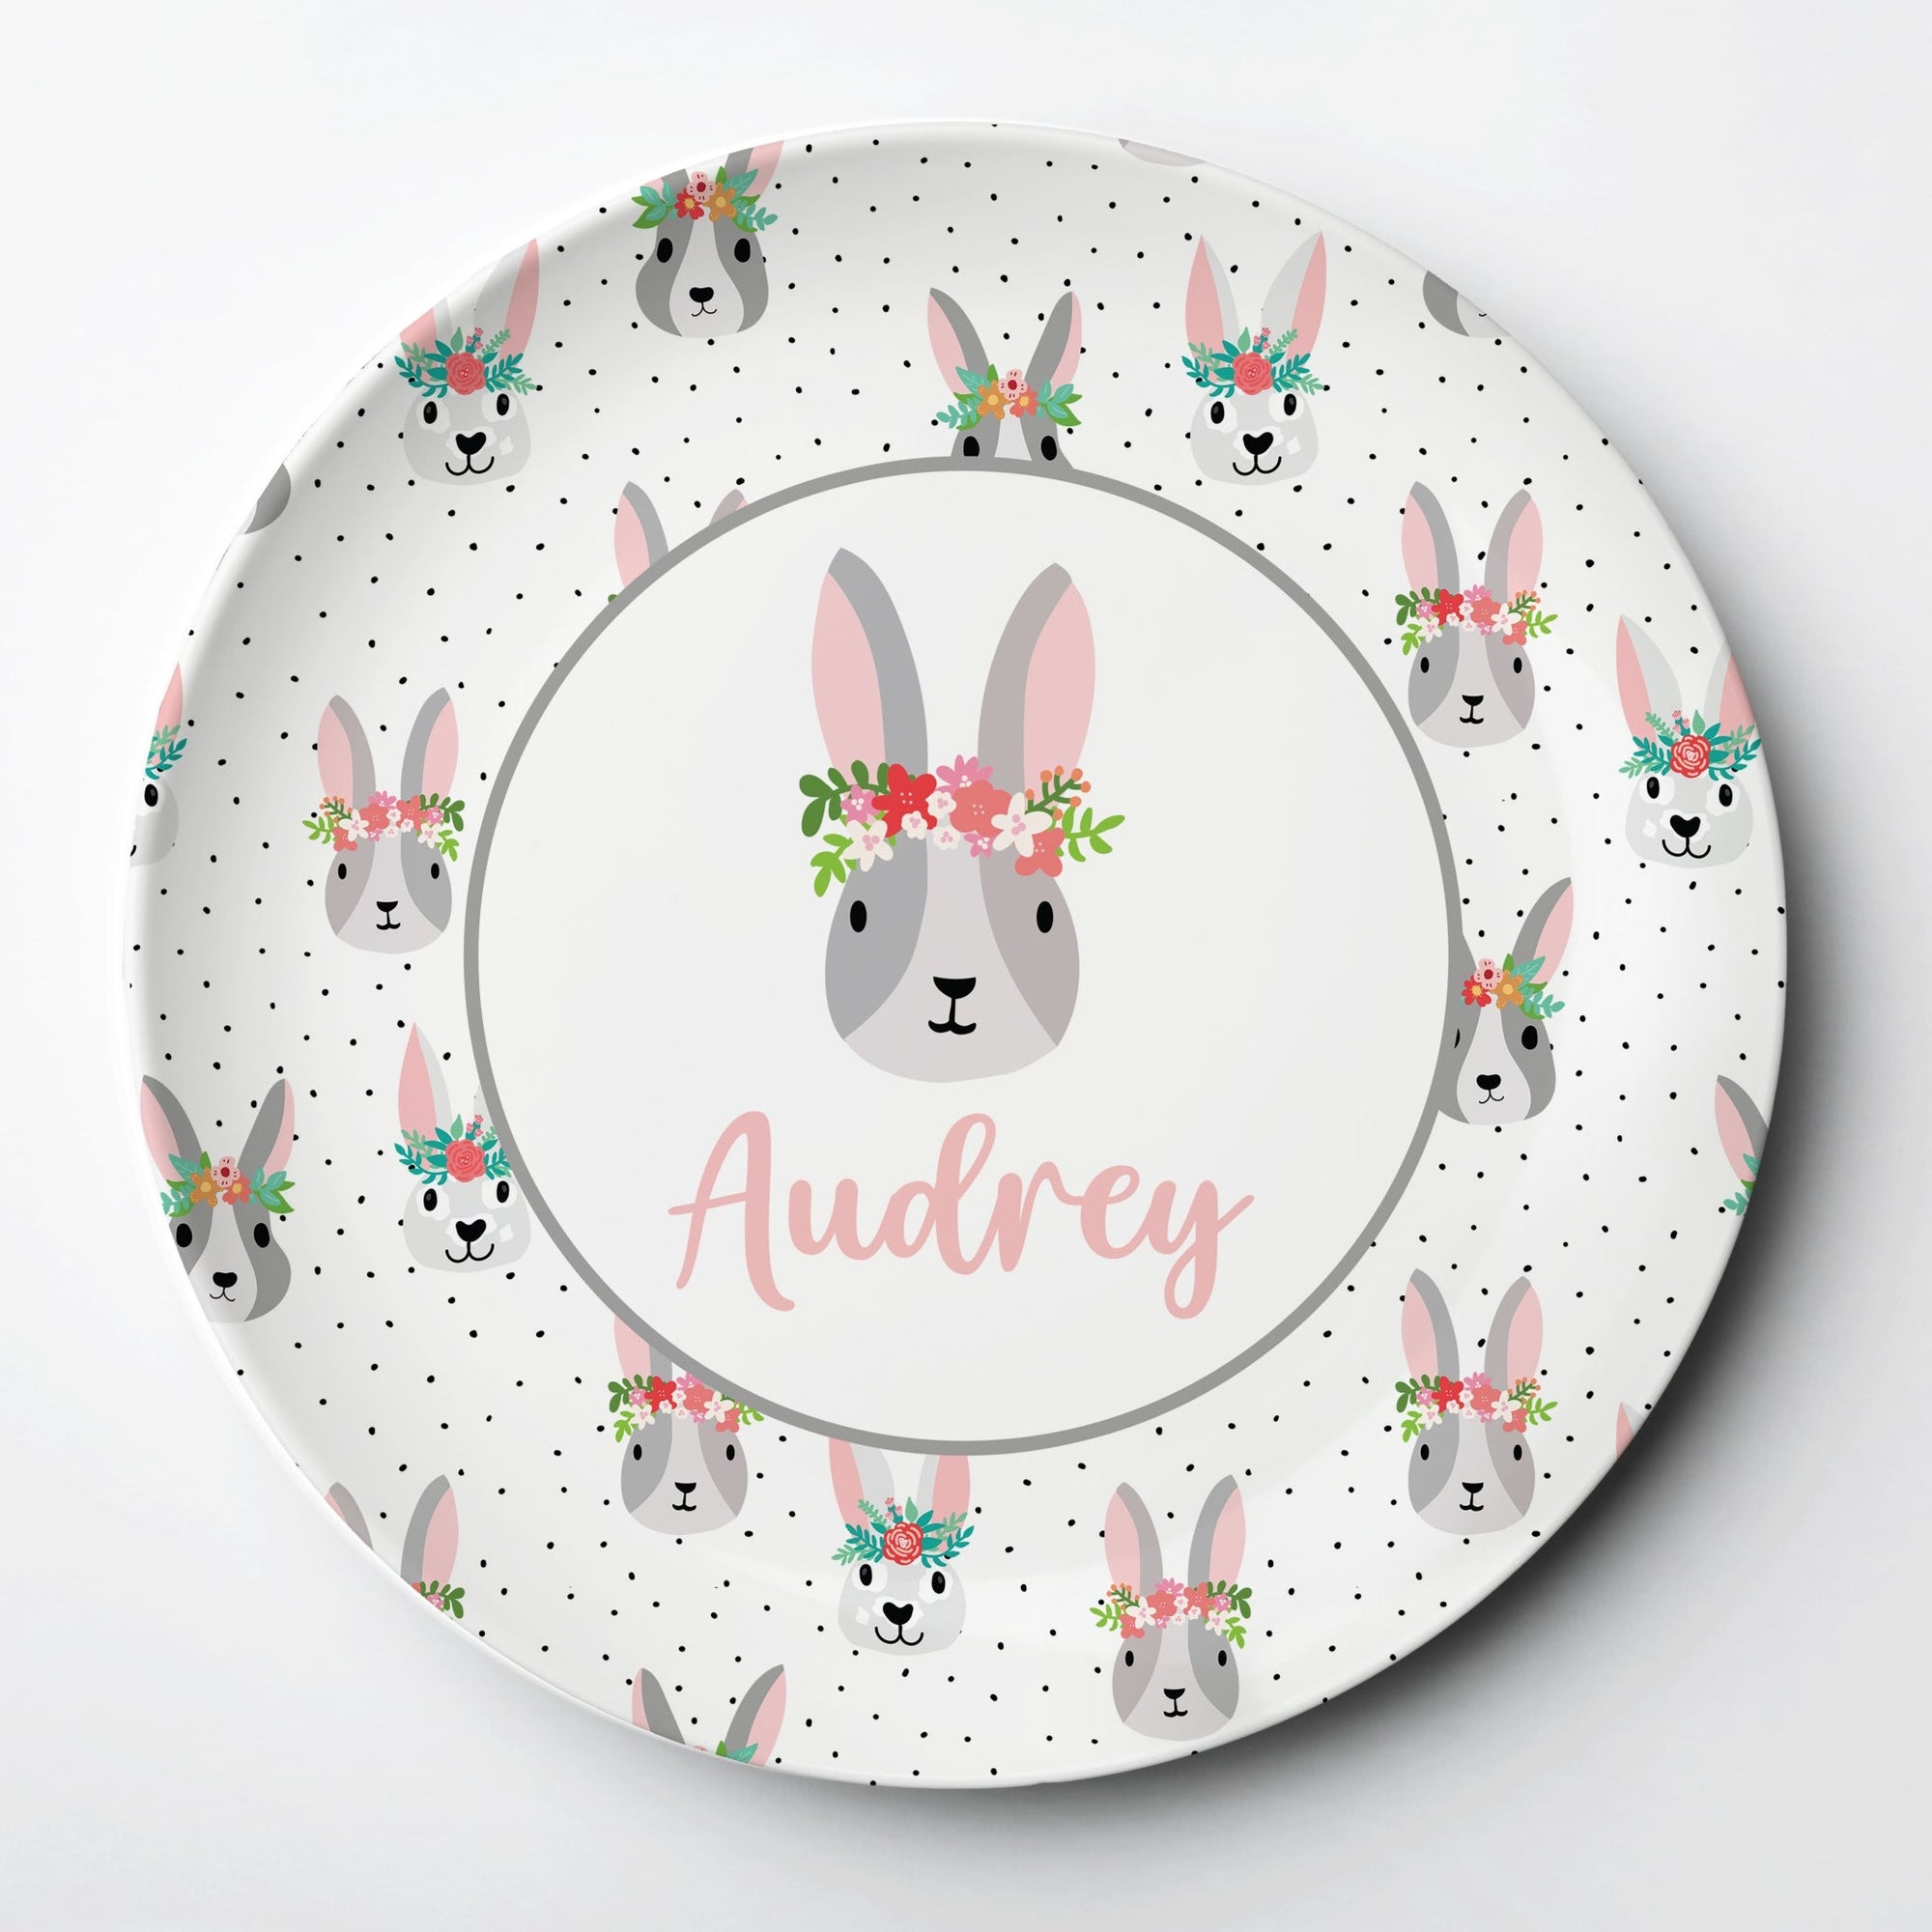 Personalized Easter Plate with a bunny pattern and a sweet Easter Bunny with a floral headband